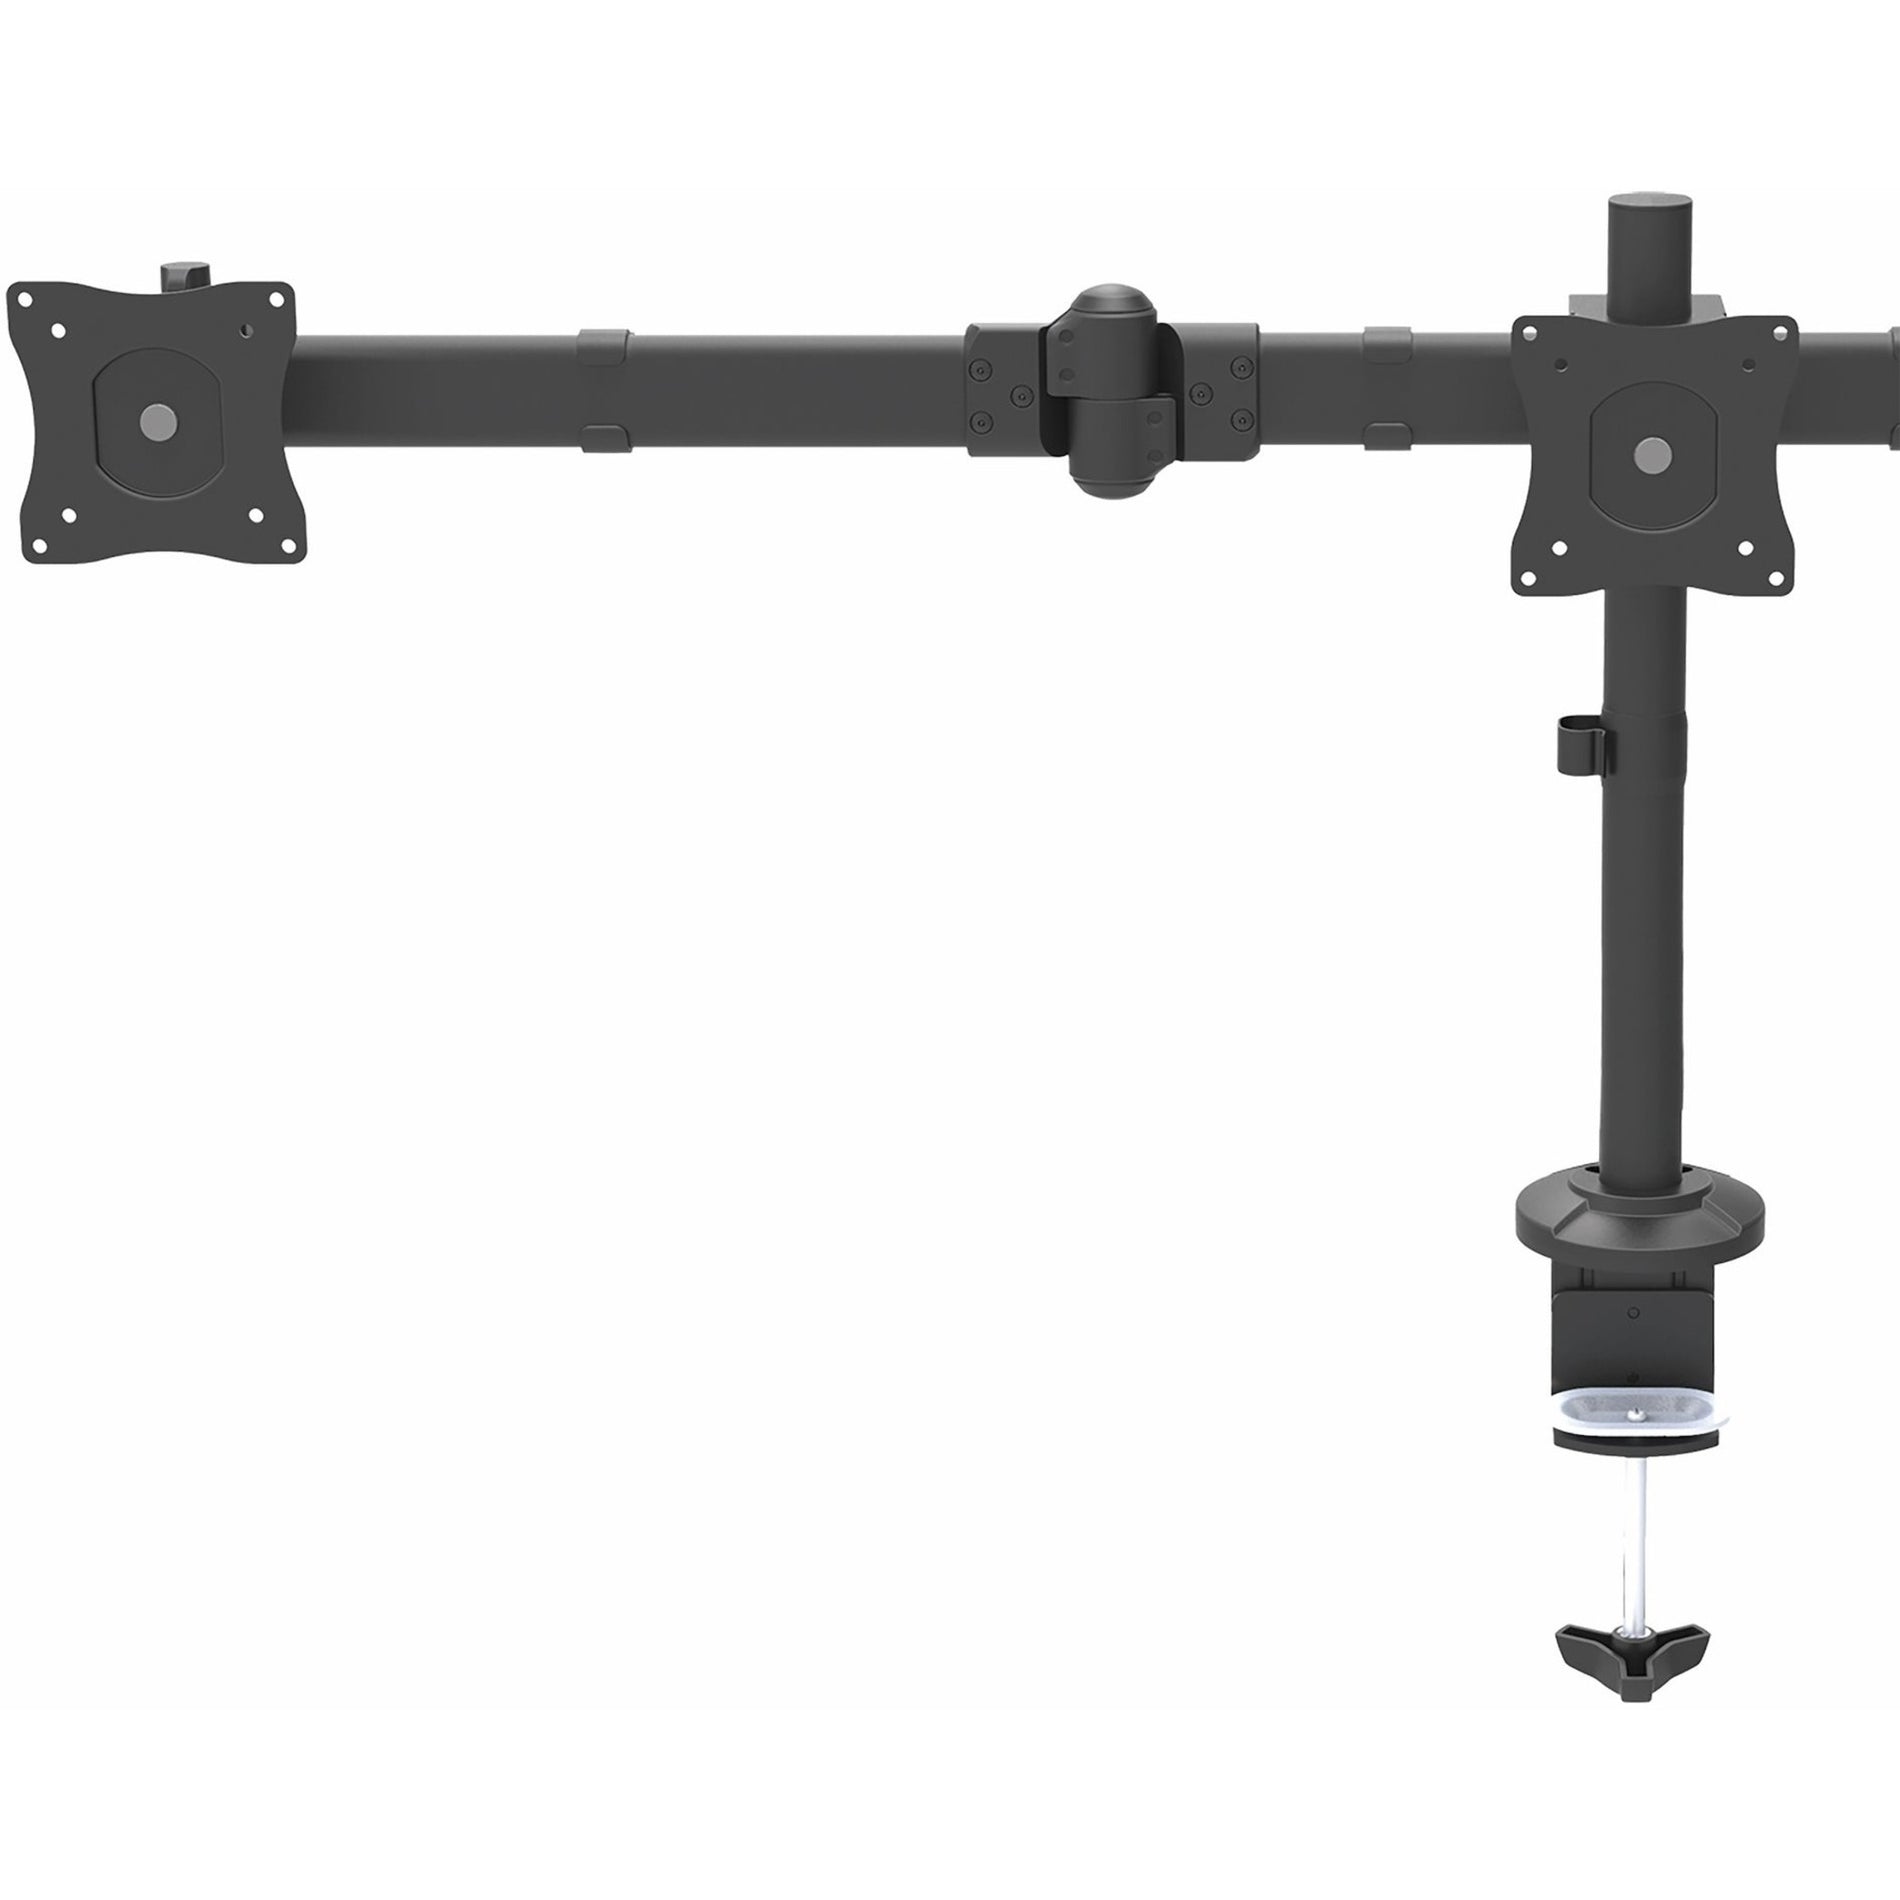 StarTech.com ARMTRIO Desk-Mount Triple Monitor Arm - Articulating, Supports 3 Monitors up to 24", Steel, Tool-less Height Adjustment